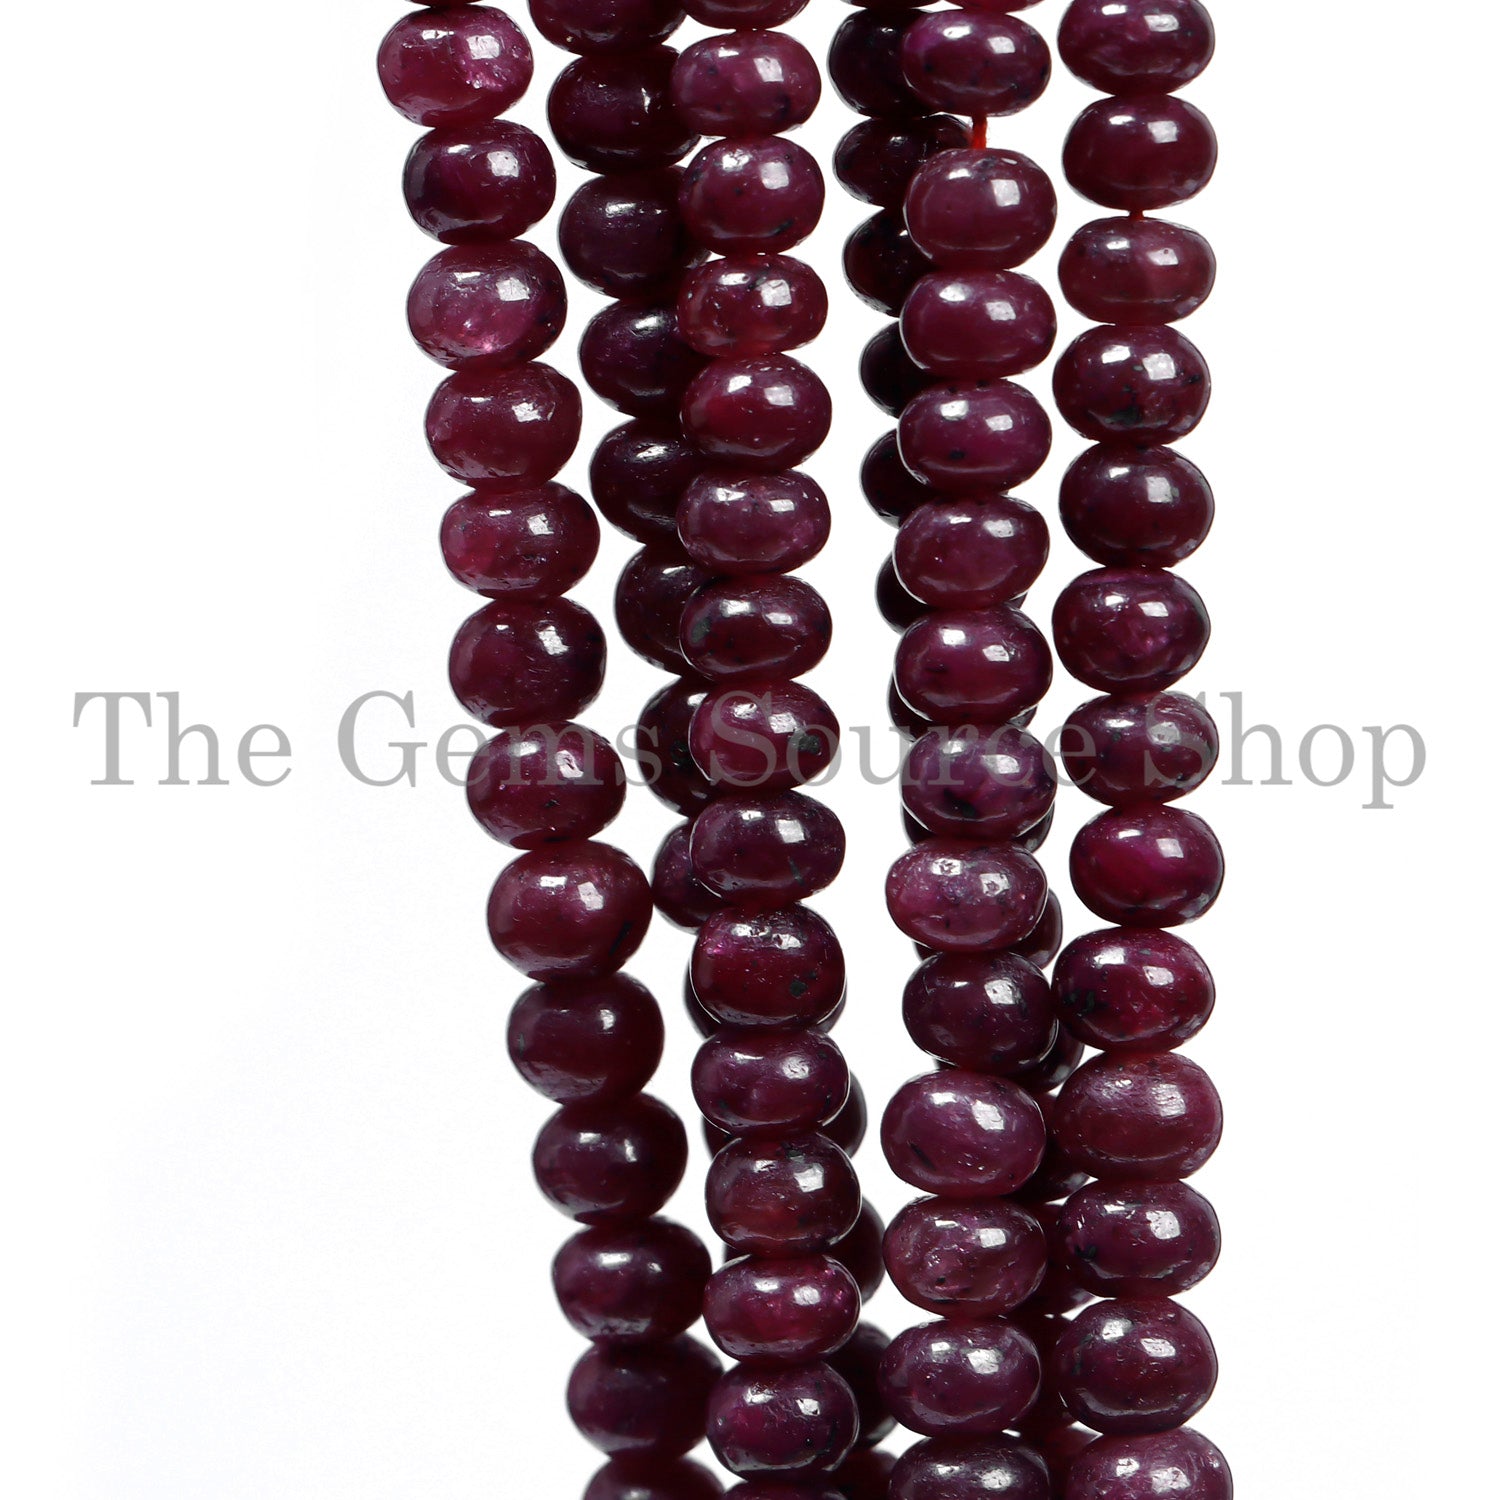 Natural Ruby Beads, Ruby Rondelle Beads, Ruby Smooth Beads, Ruby Gemstone Beads